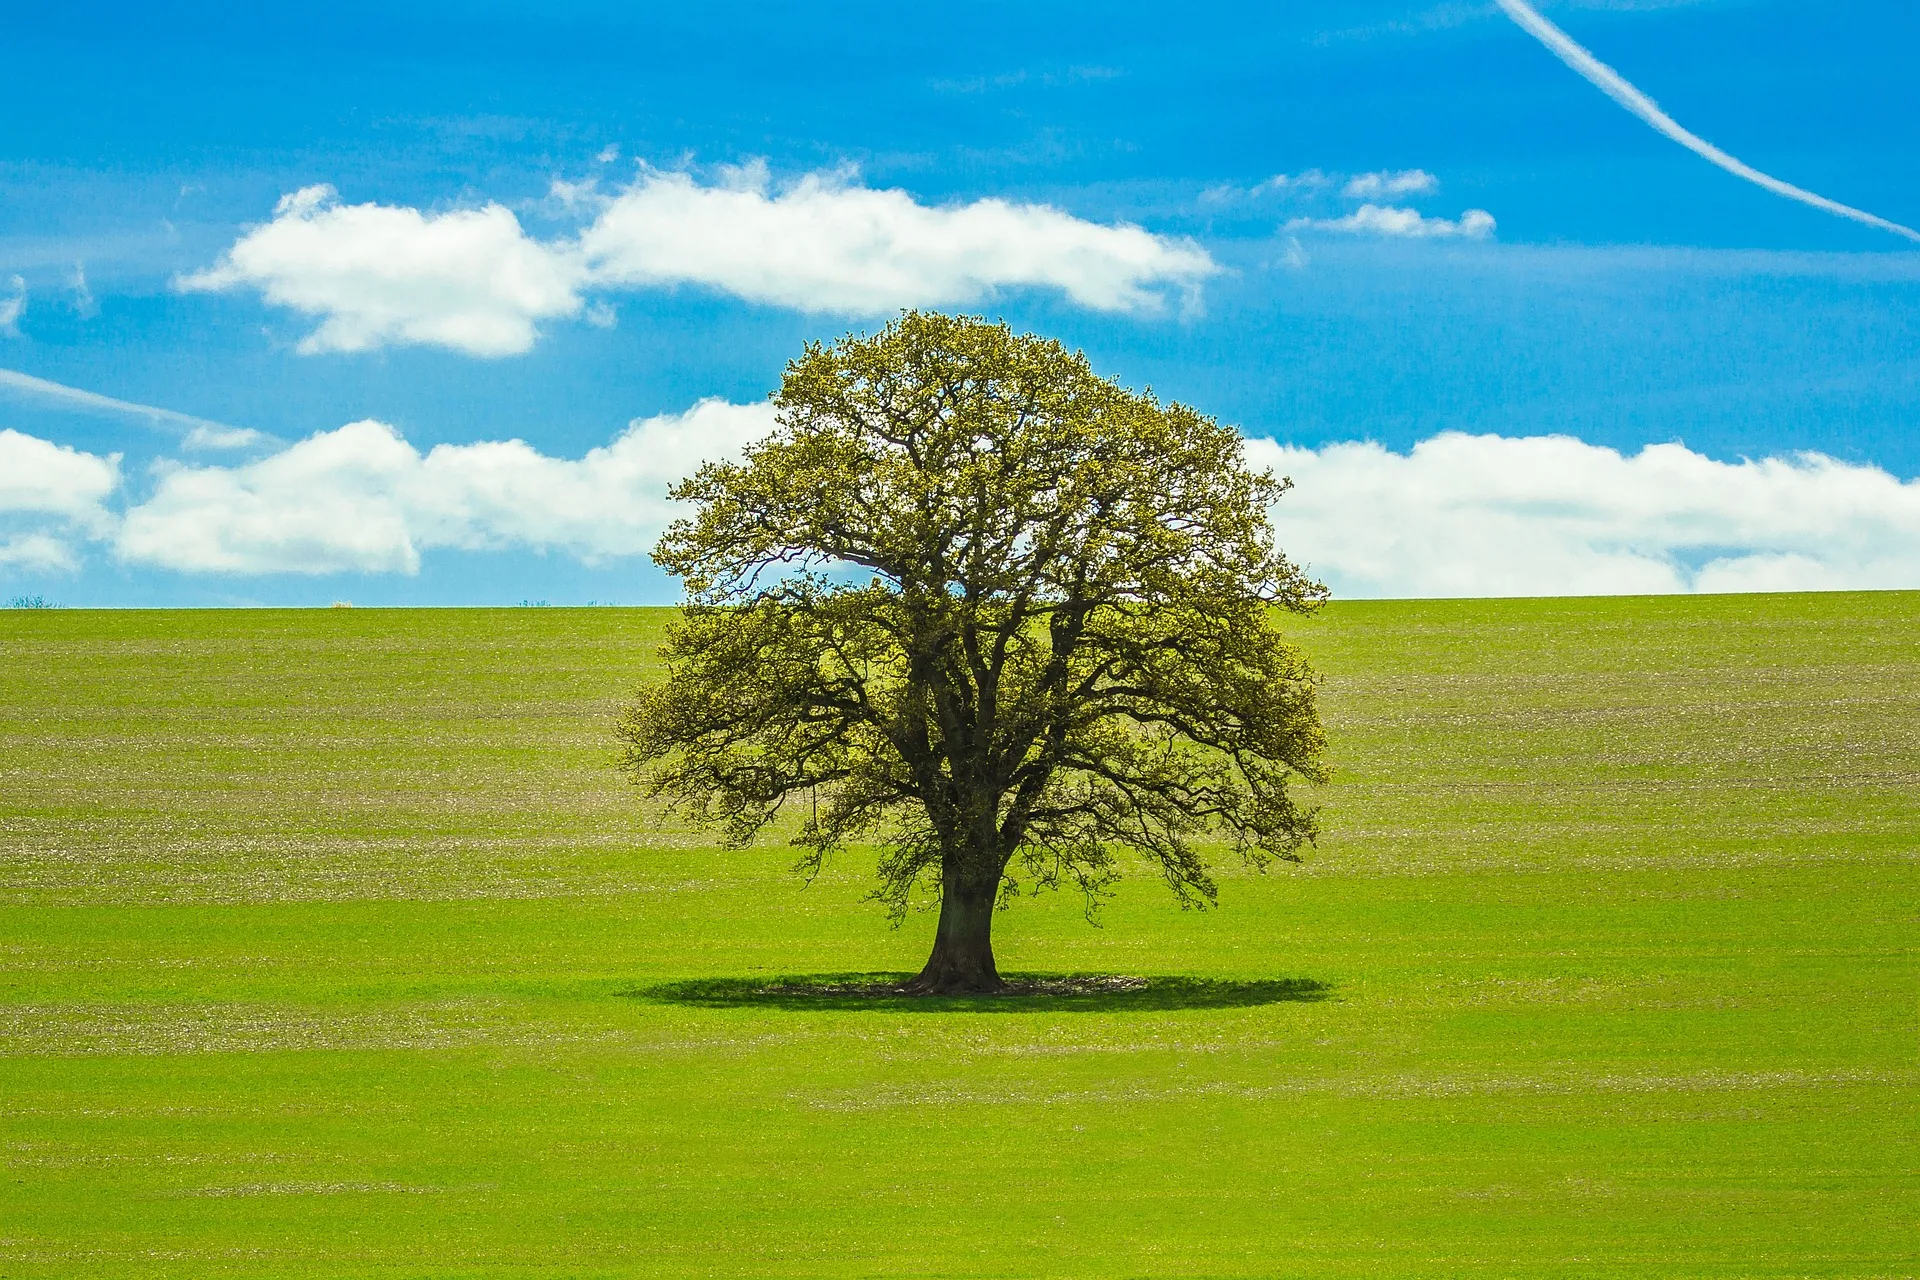 Vibrant tree in a lush field under a clear blue sky, illustrating the symbiosis of air, soil, and plants—akin to the interdependence of physical, mental, and social health.